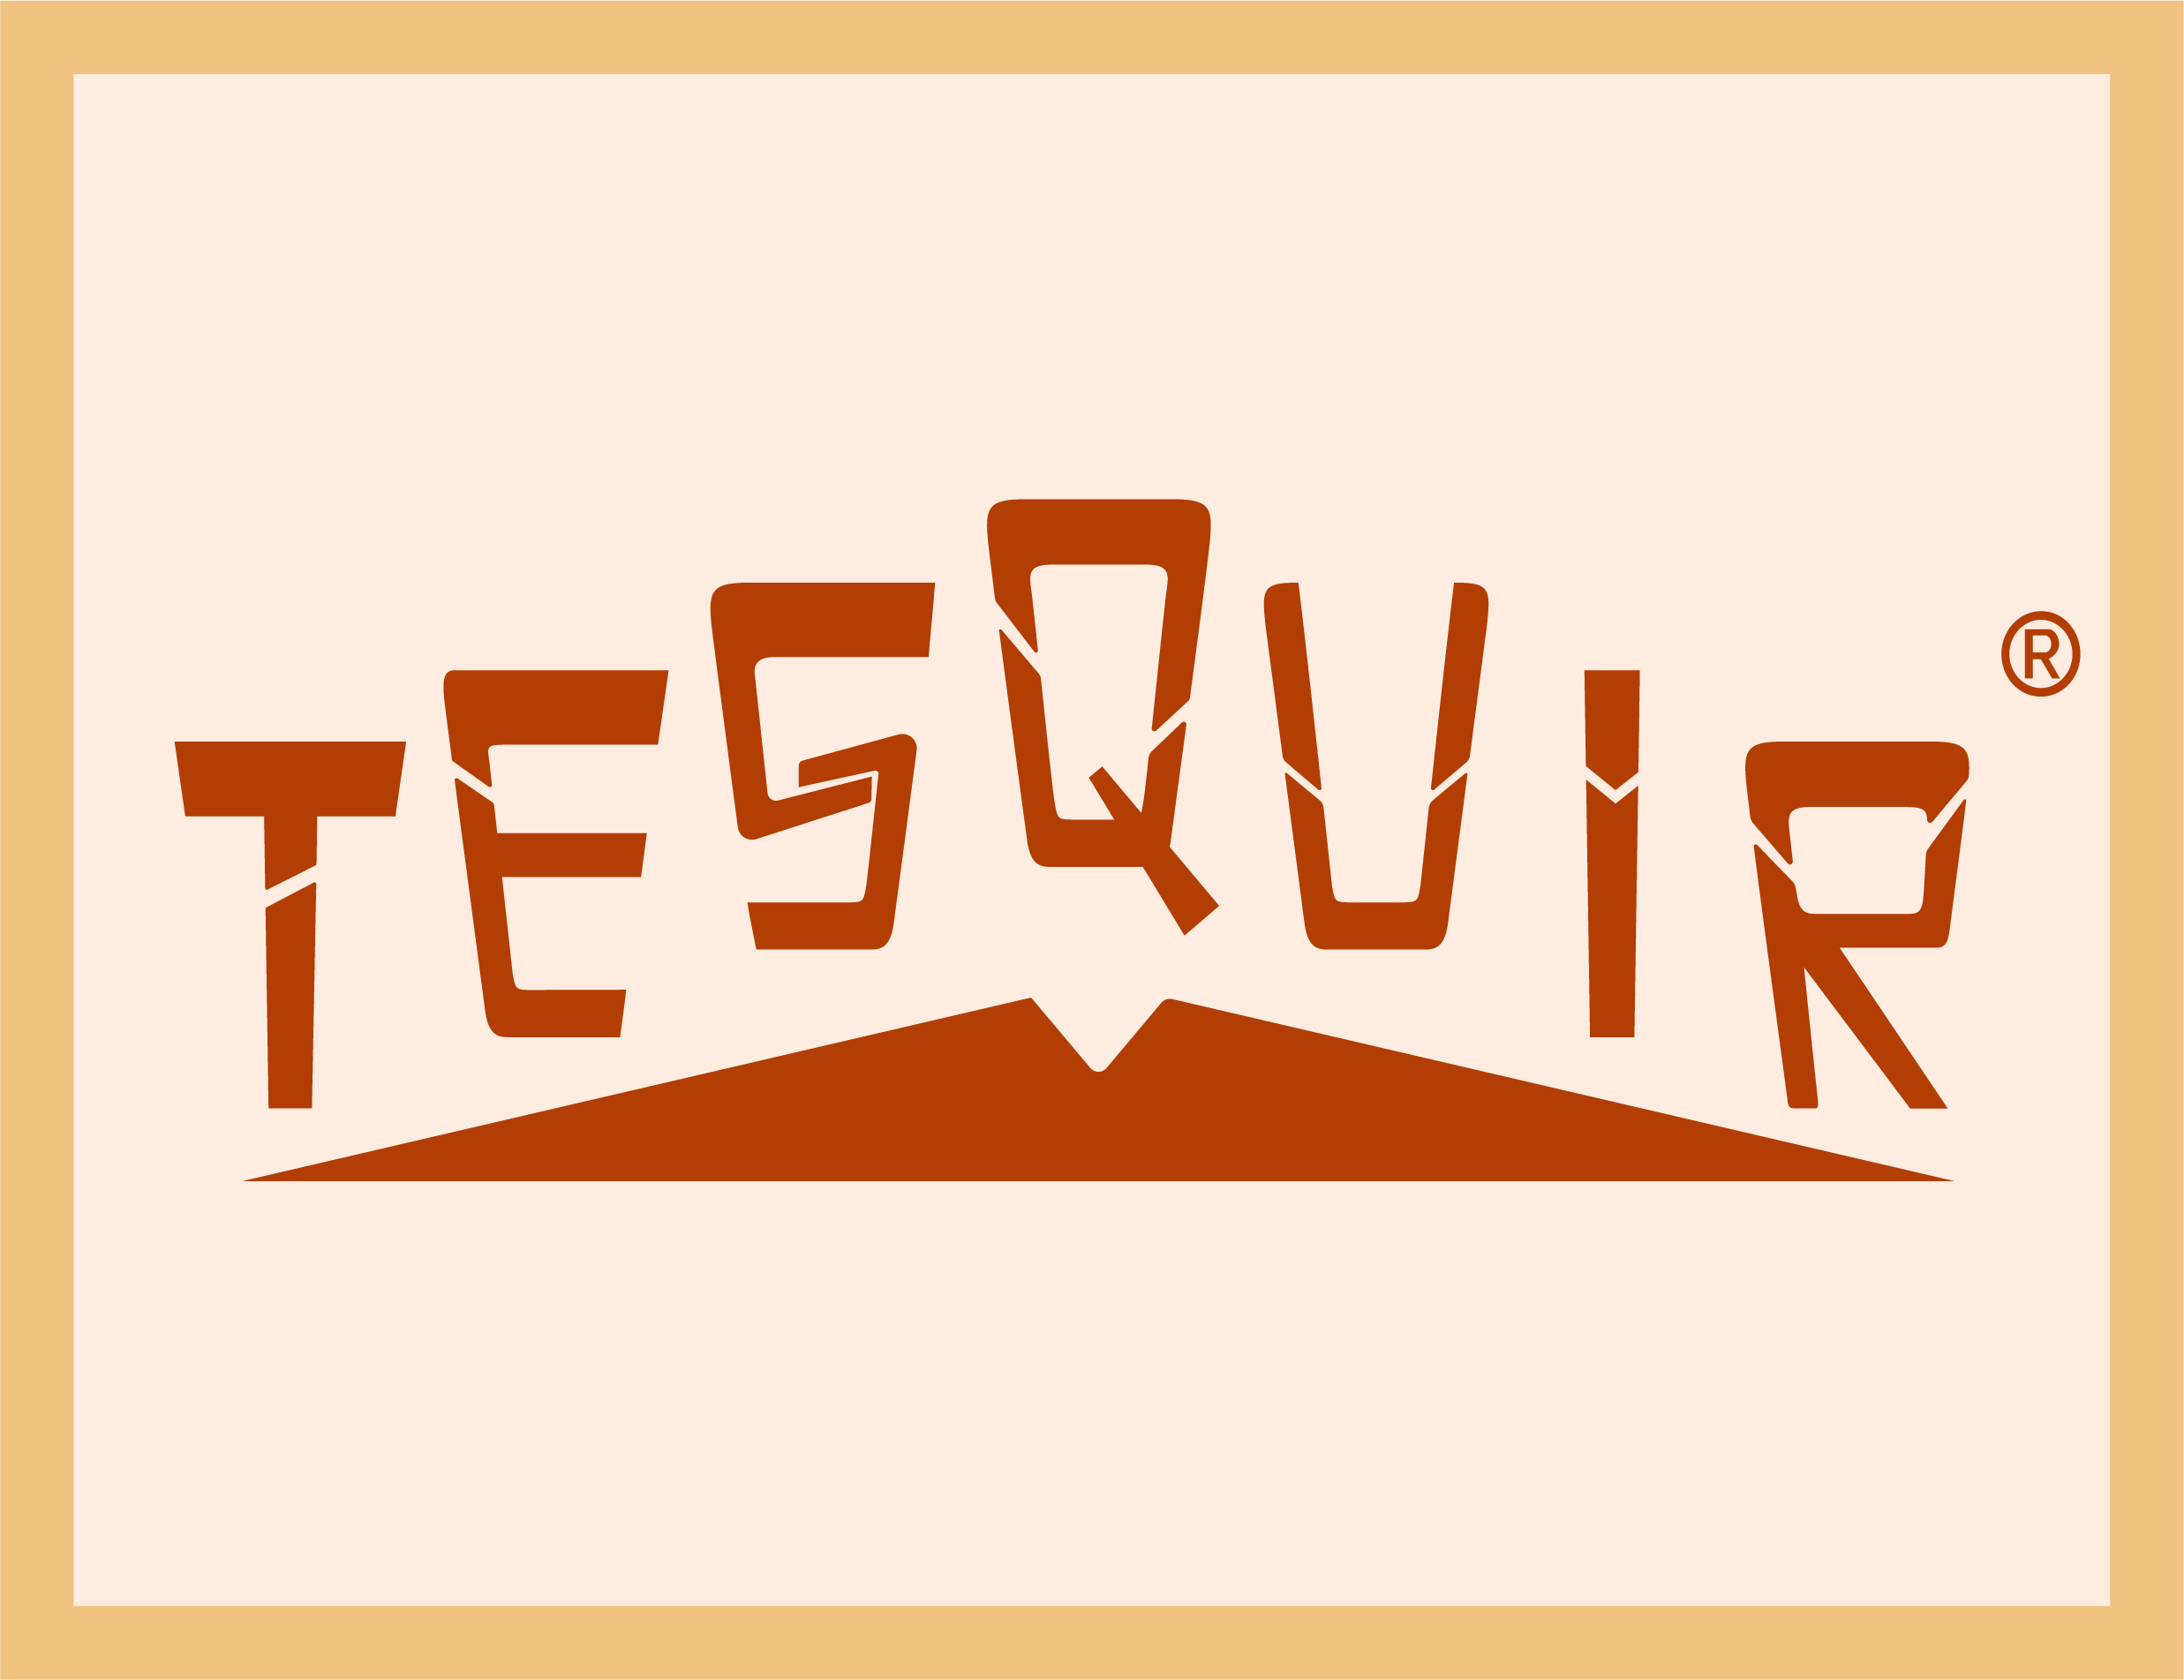 Logo of TESQUIR - the research product that is the 'manufacturing capability profiler'